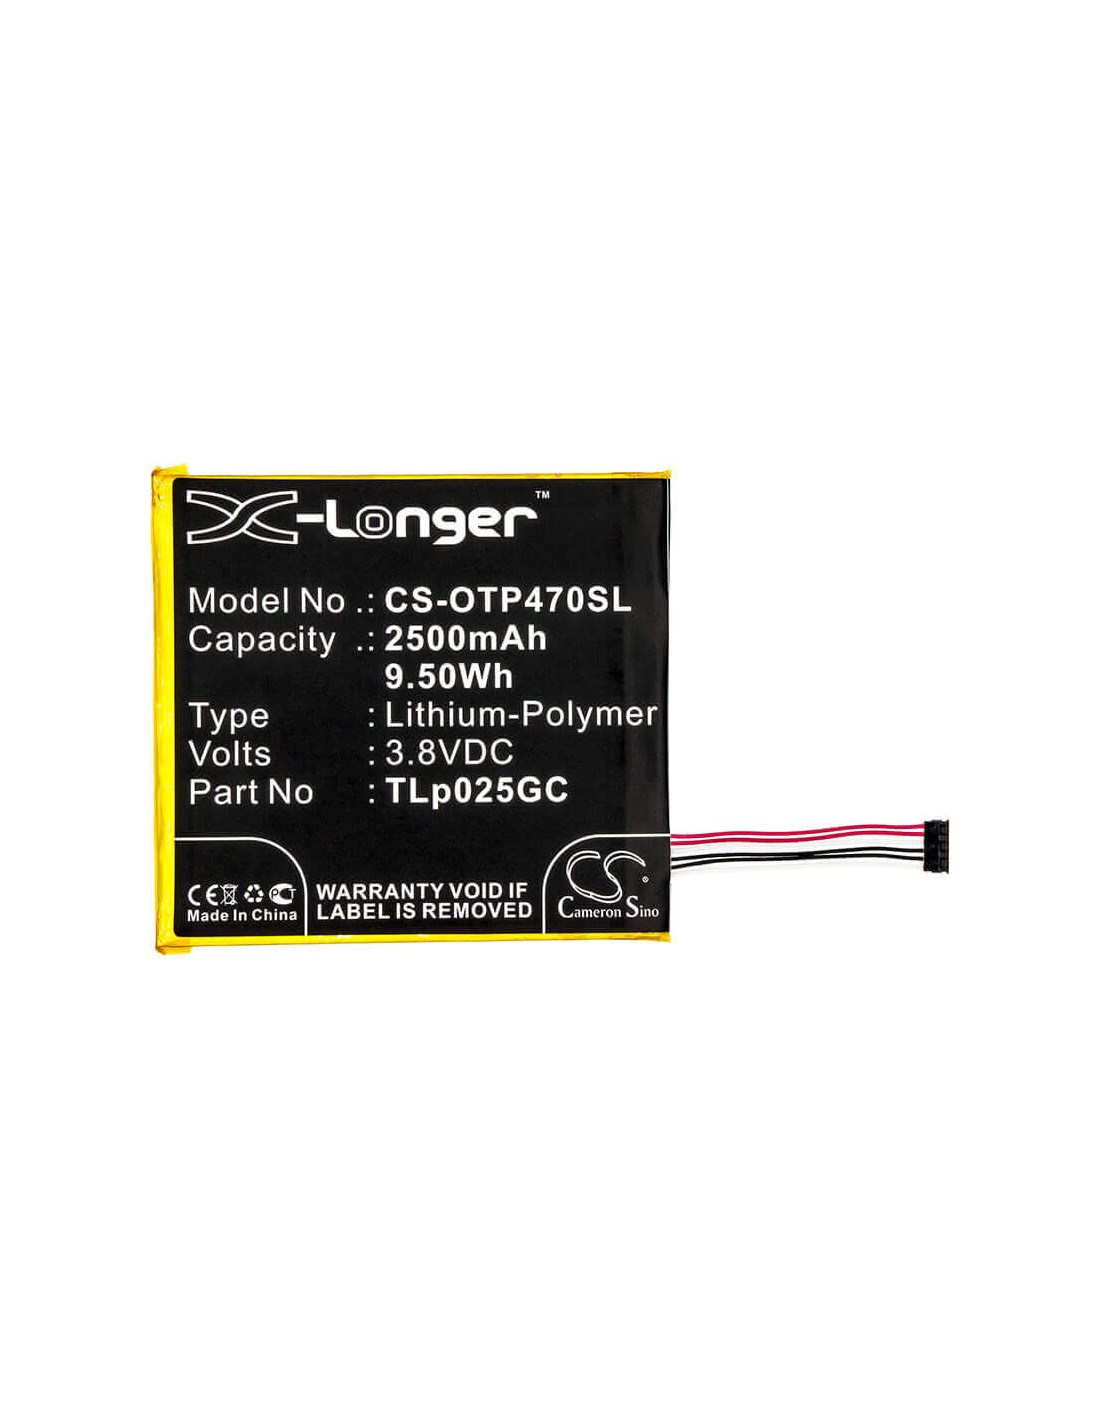 Battery for Alcatel, One Touch Pixi 4 7.0, One Touch Pixi 4 7.0 3g, One Touch Pixi 4 7.0 4g 3.8V, 2500mAh - 9.50Wh